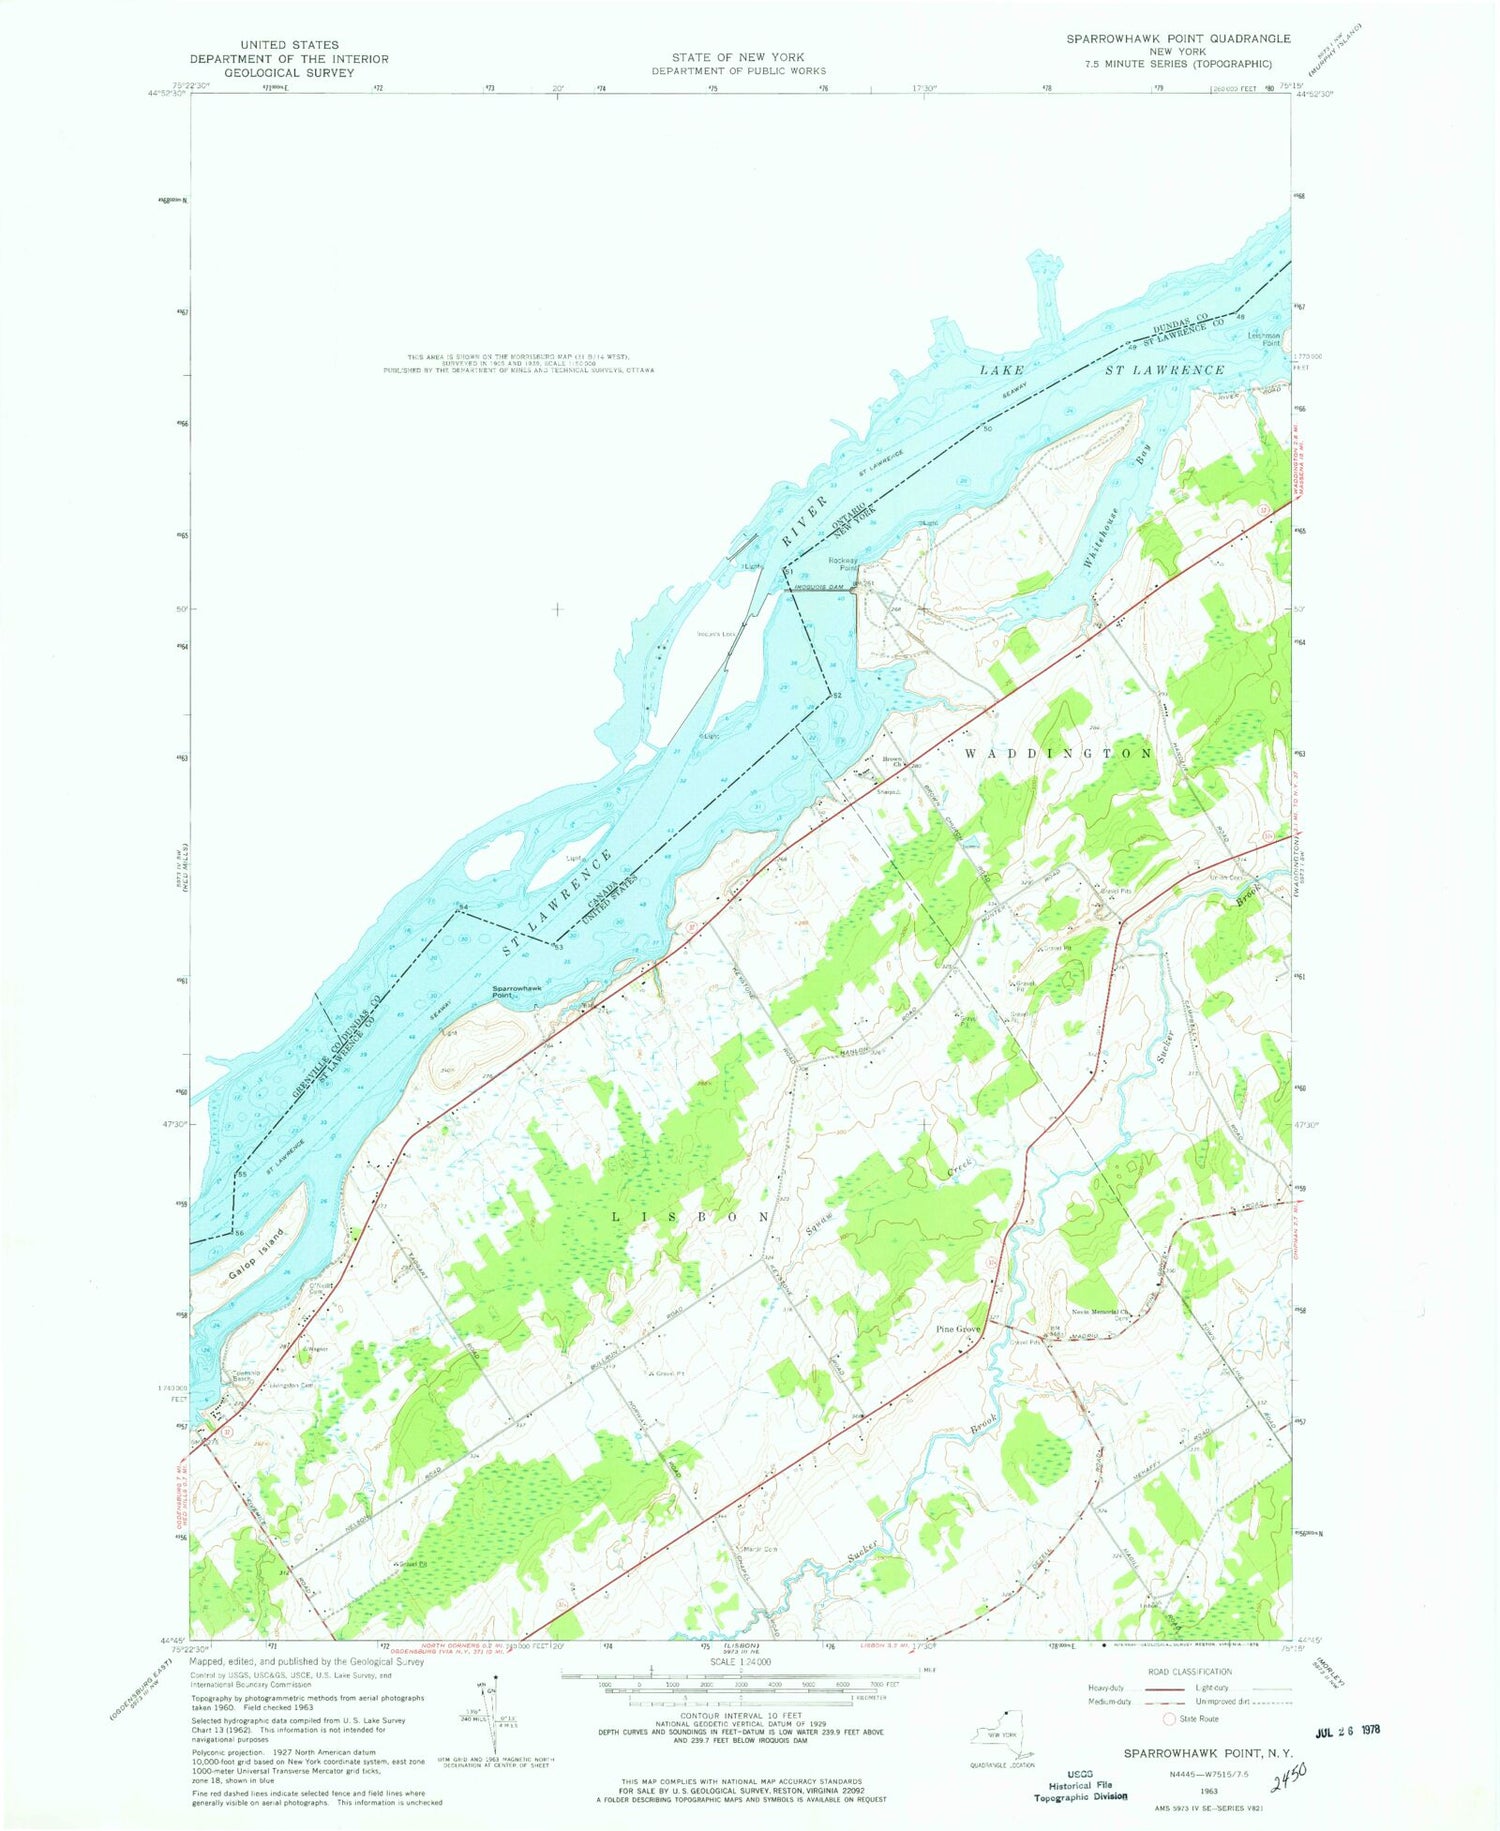 Classic USGS Sparrowhawk Point New York 7.5'x7.5' Topo Map Image